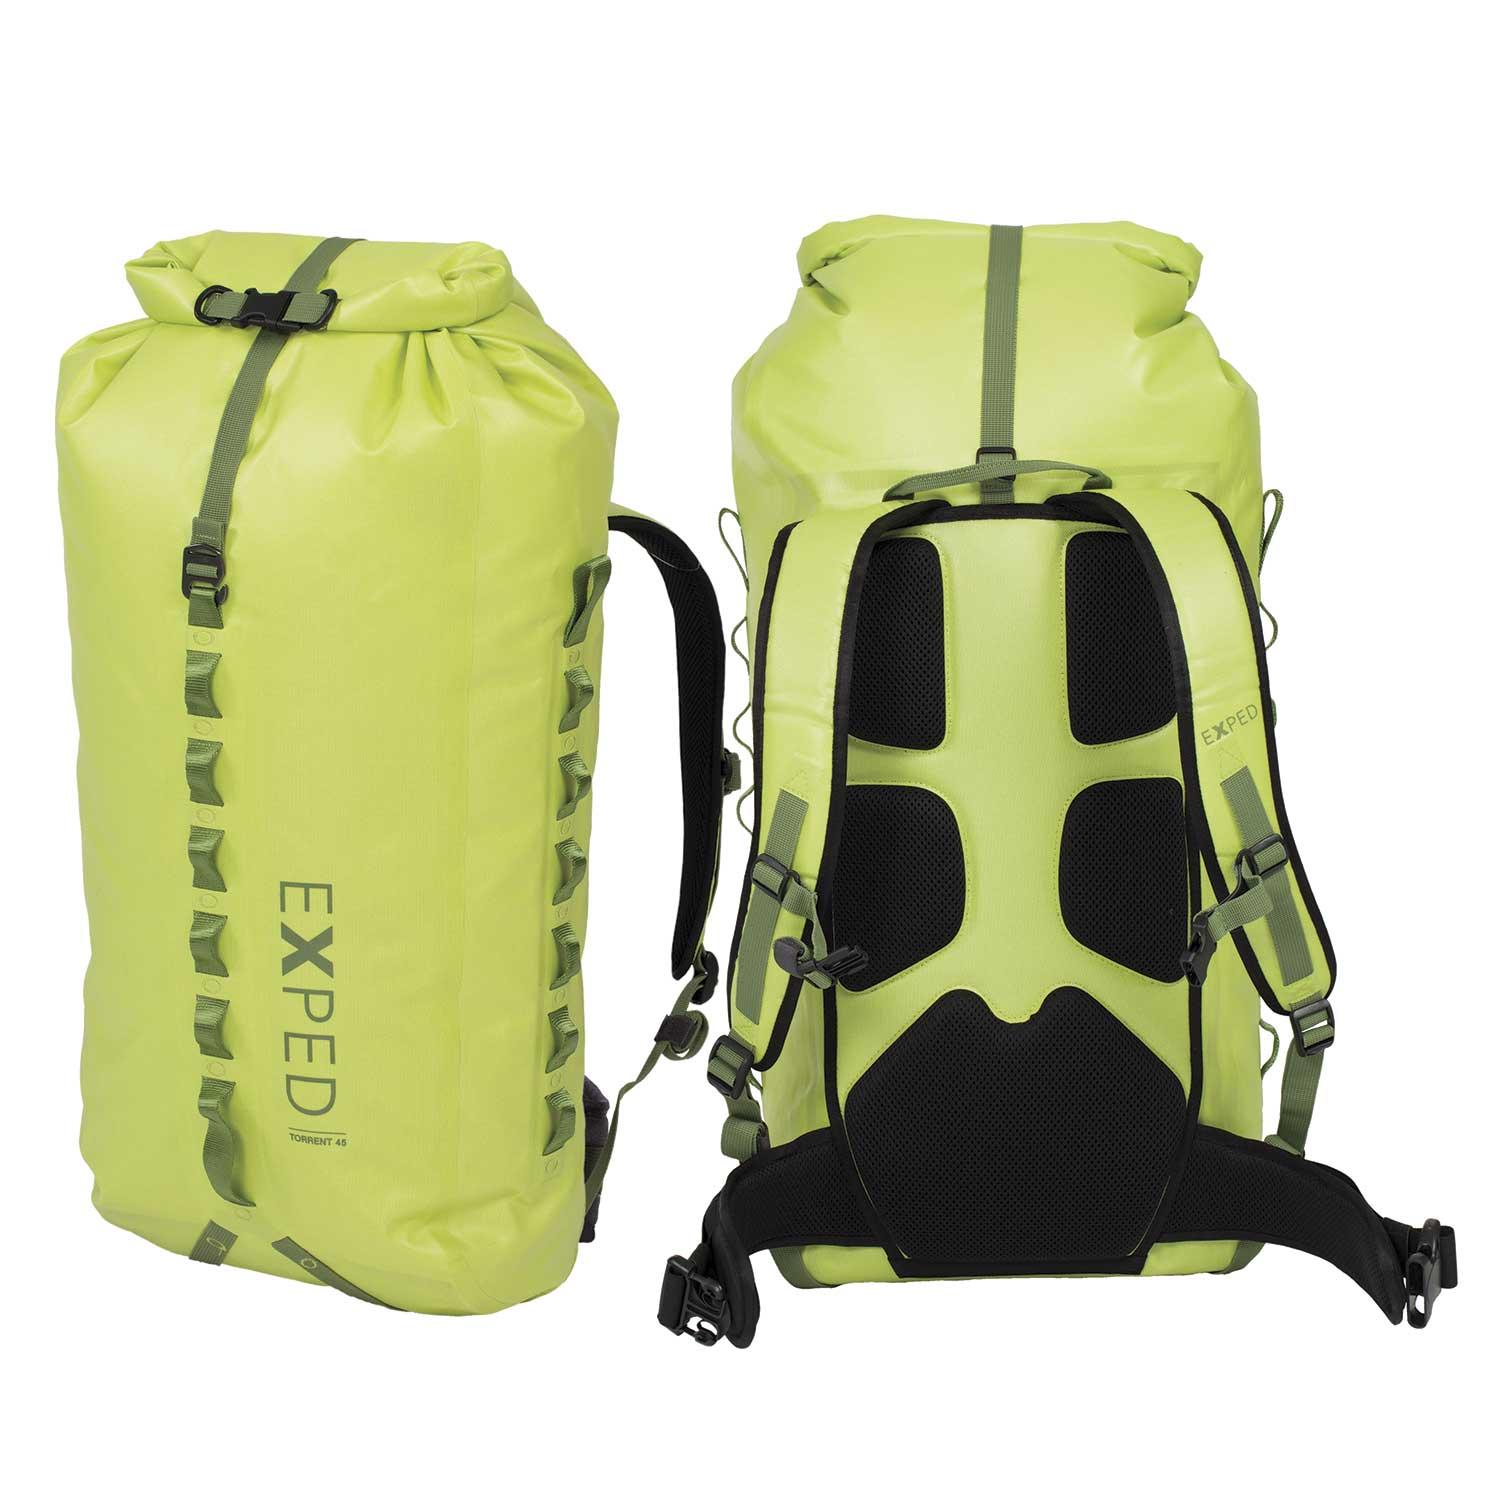 Exped Fold Drybag 4 Pack XS-L Olive Drab | Military Kit